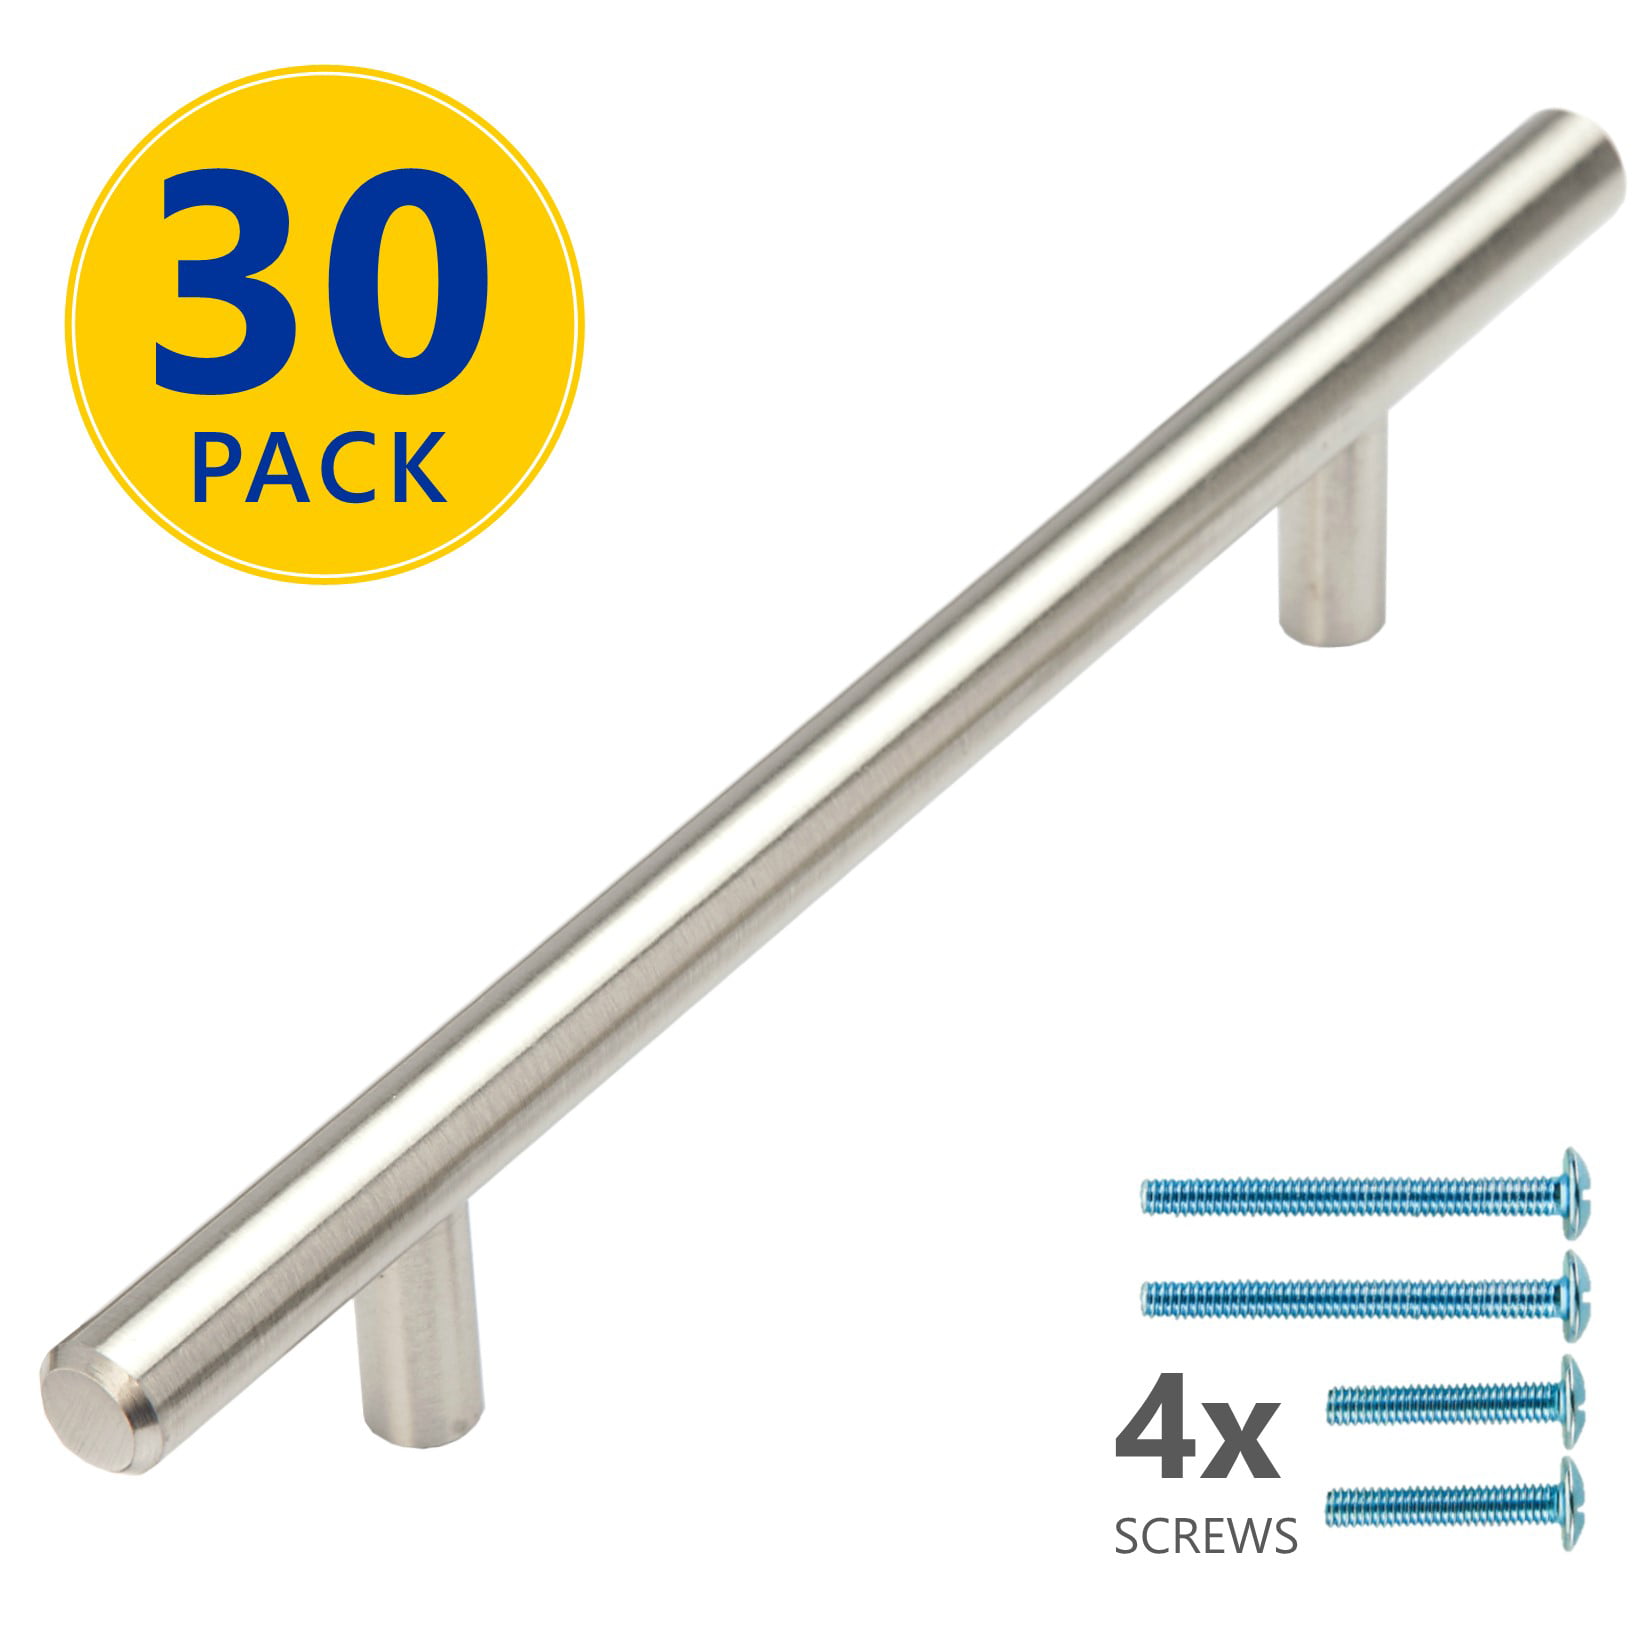 30 Pack | 8" Stainless Steel T Bar Cabinet Pulls: 5 Inch Hole Center 5 Inch Stainless Steel Cabinet Pulls